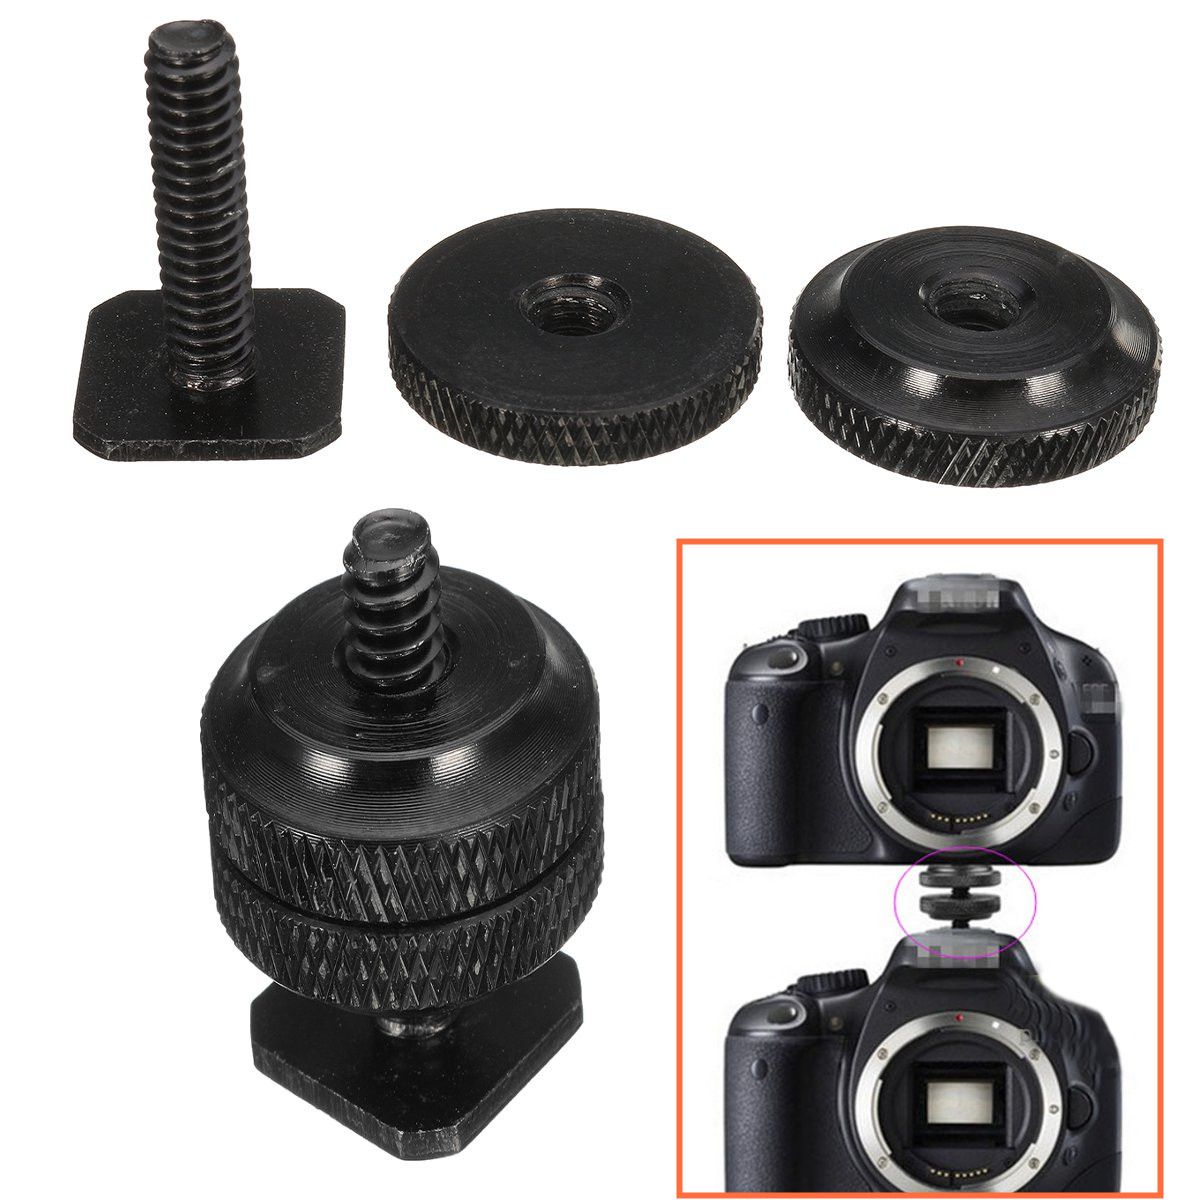 Dual-Nuts-Metal-Tripod-Mount-Screw-to-Flash-Camera-Light-Stand-Hot-Shoe-Adapter-1132915